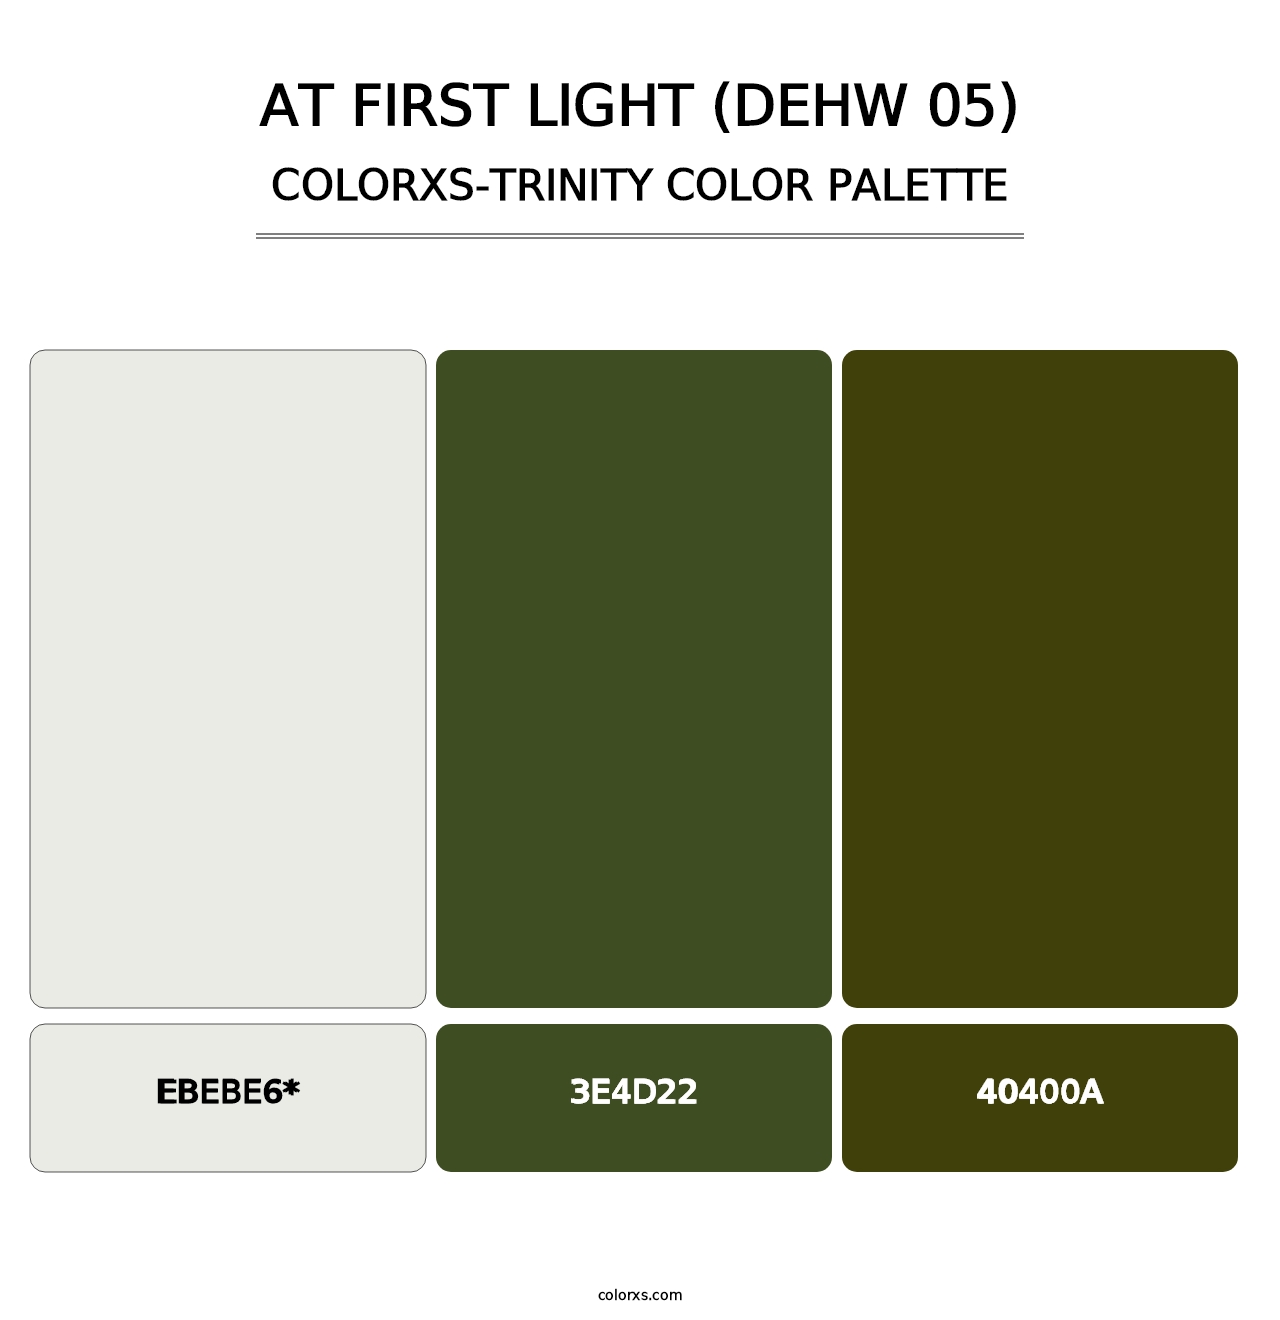 At First Light (DEHW 05) - Colorxs Trinity Palette